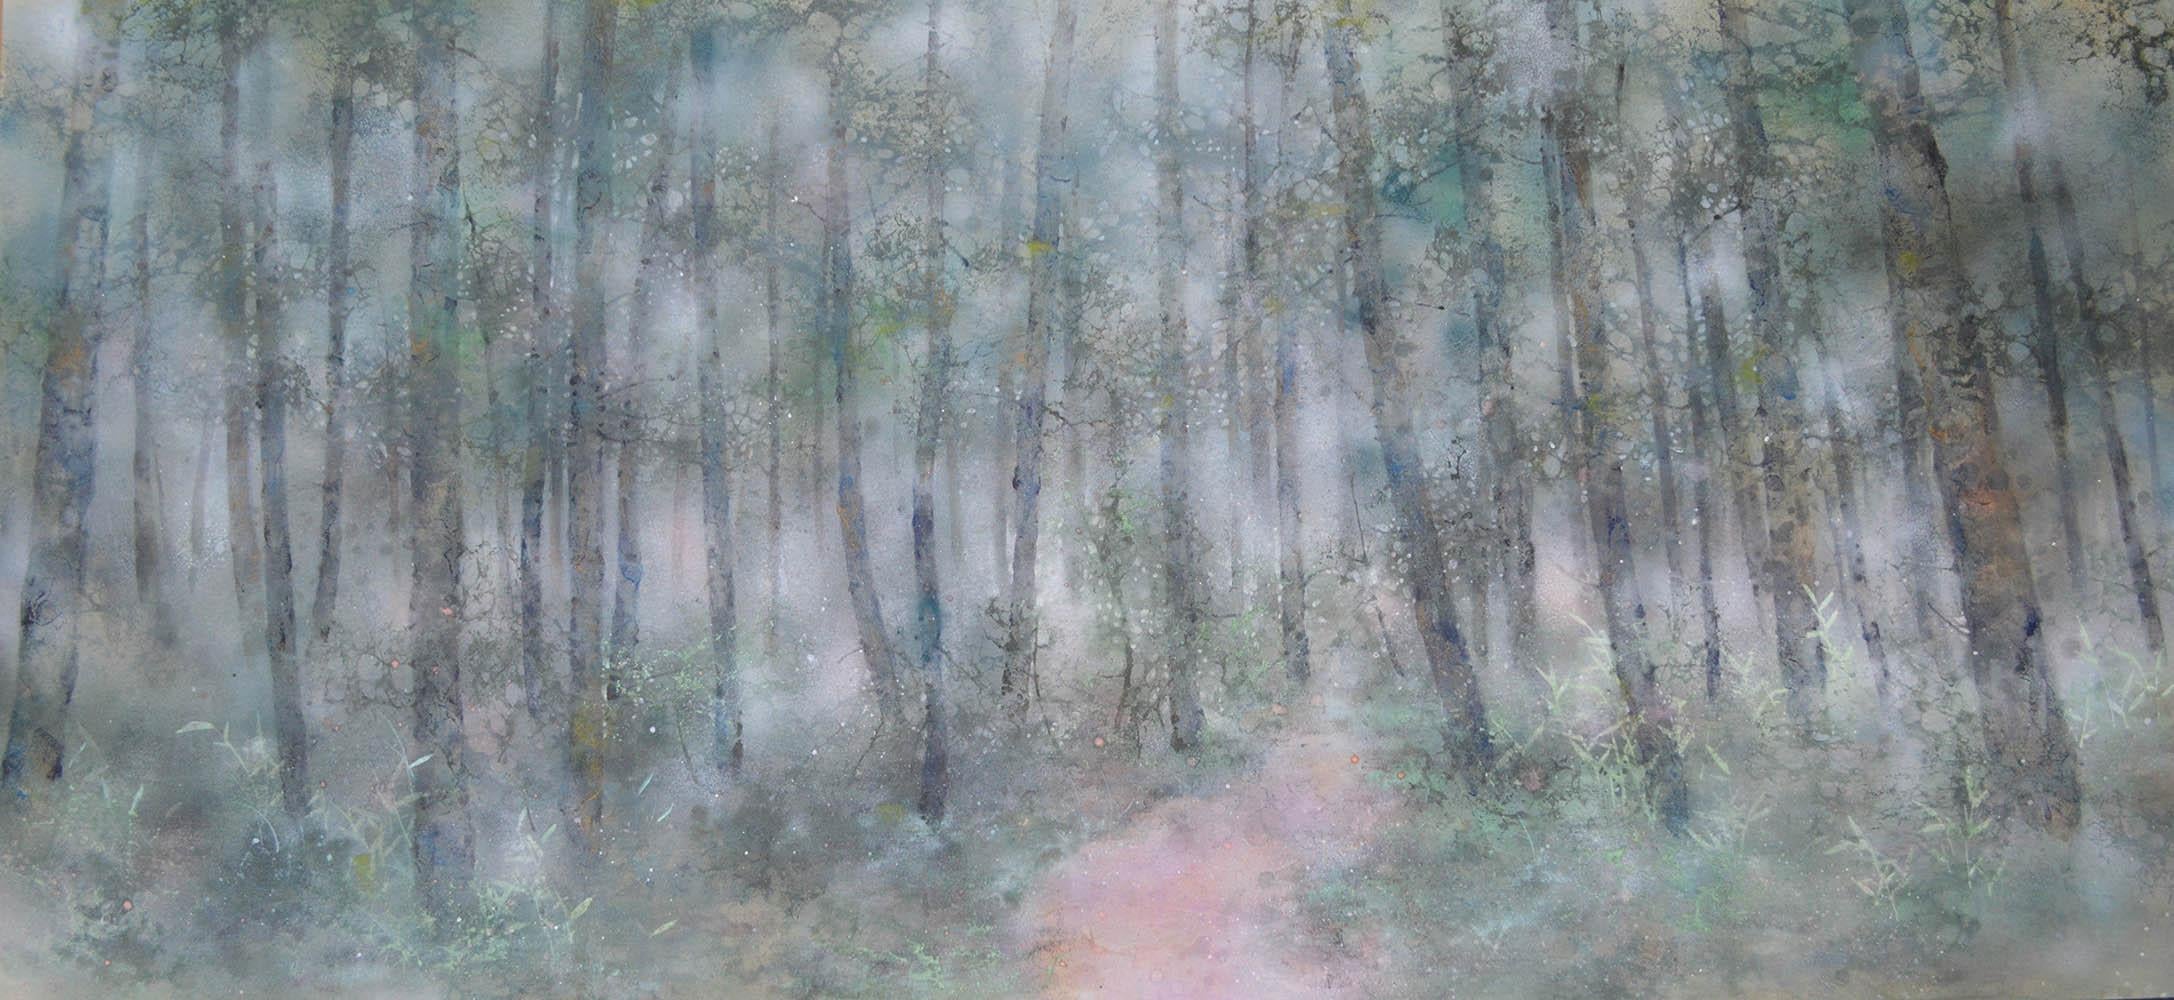 Silva by Chen Yiching - Contemporary nihonga painting, forest, trees, green - Mixed Media Art by Yiching Chen